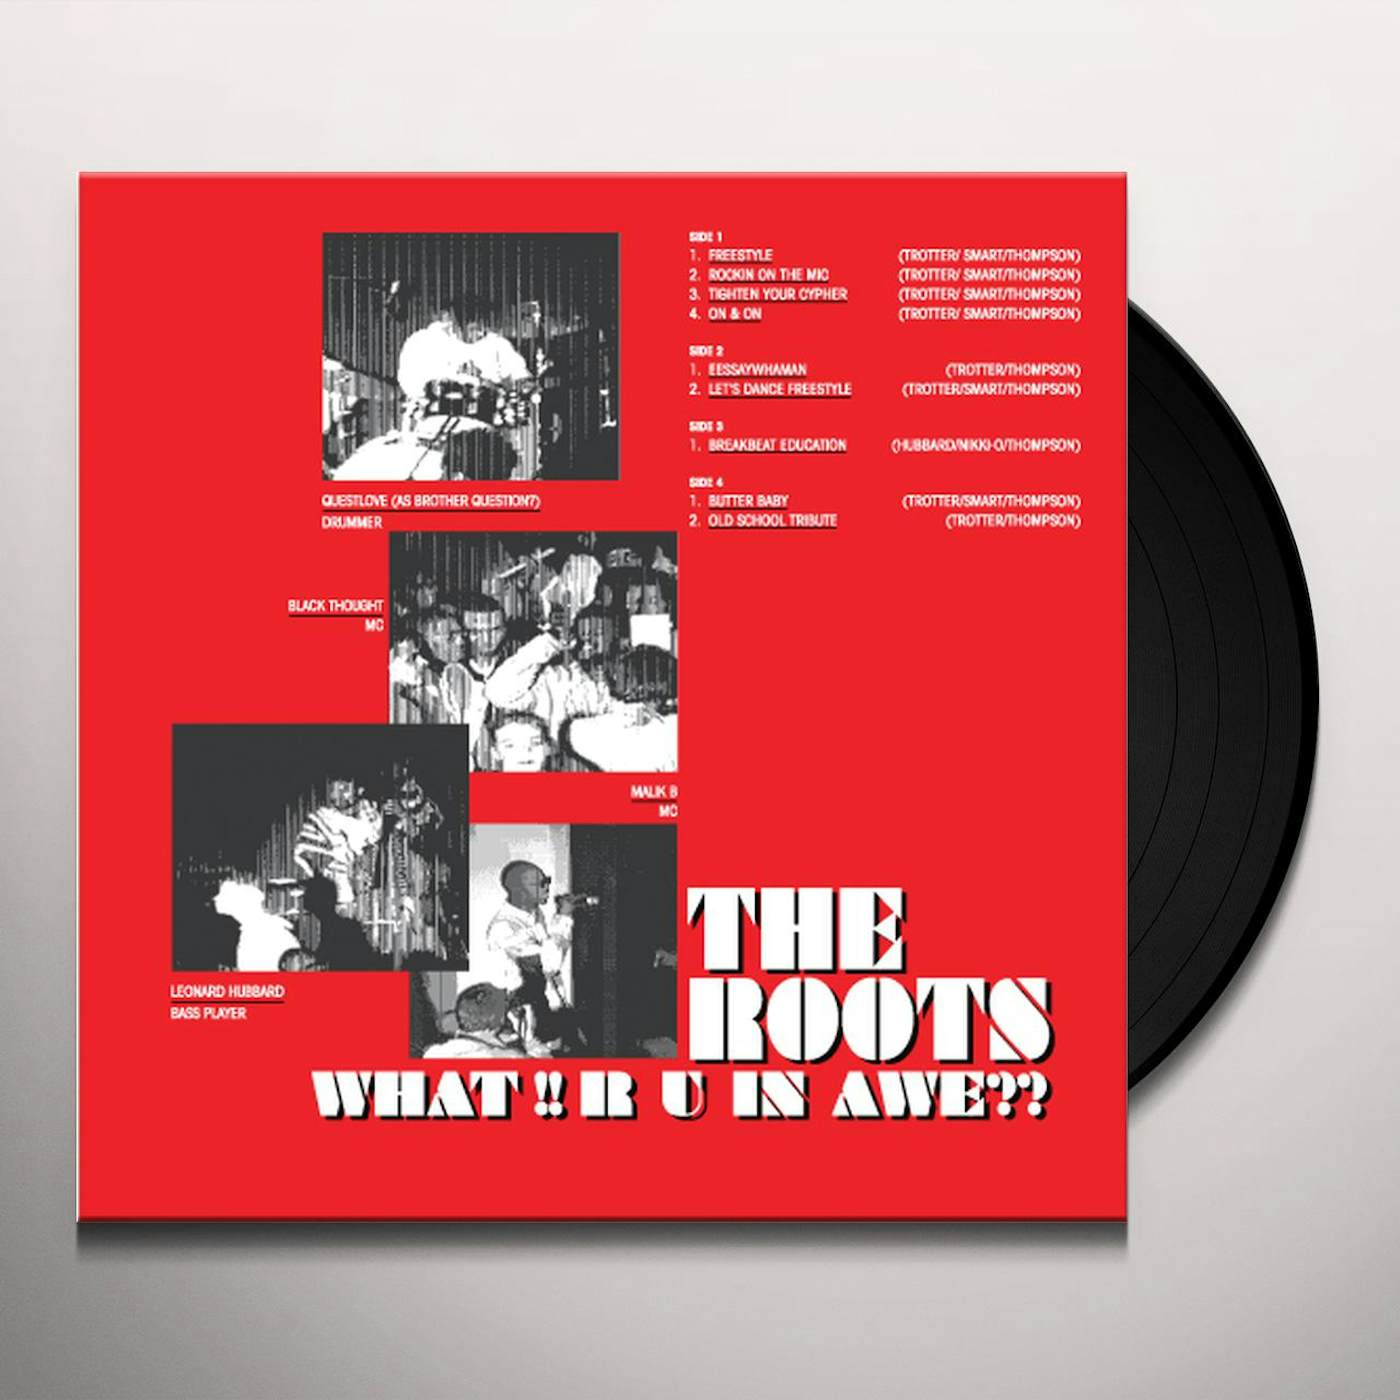 The Roots WHAT!! R U IN AWE?? Vinyl Record - Limited Edition